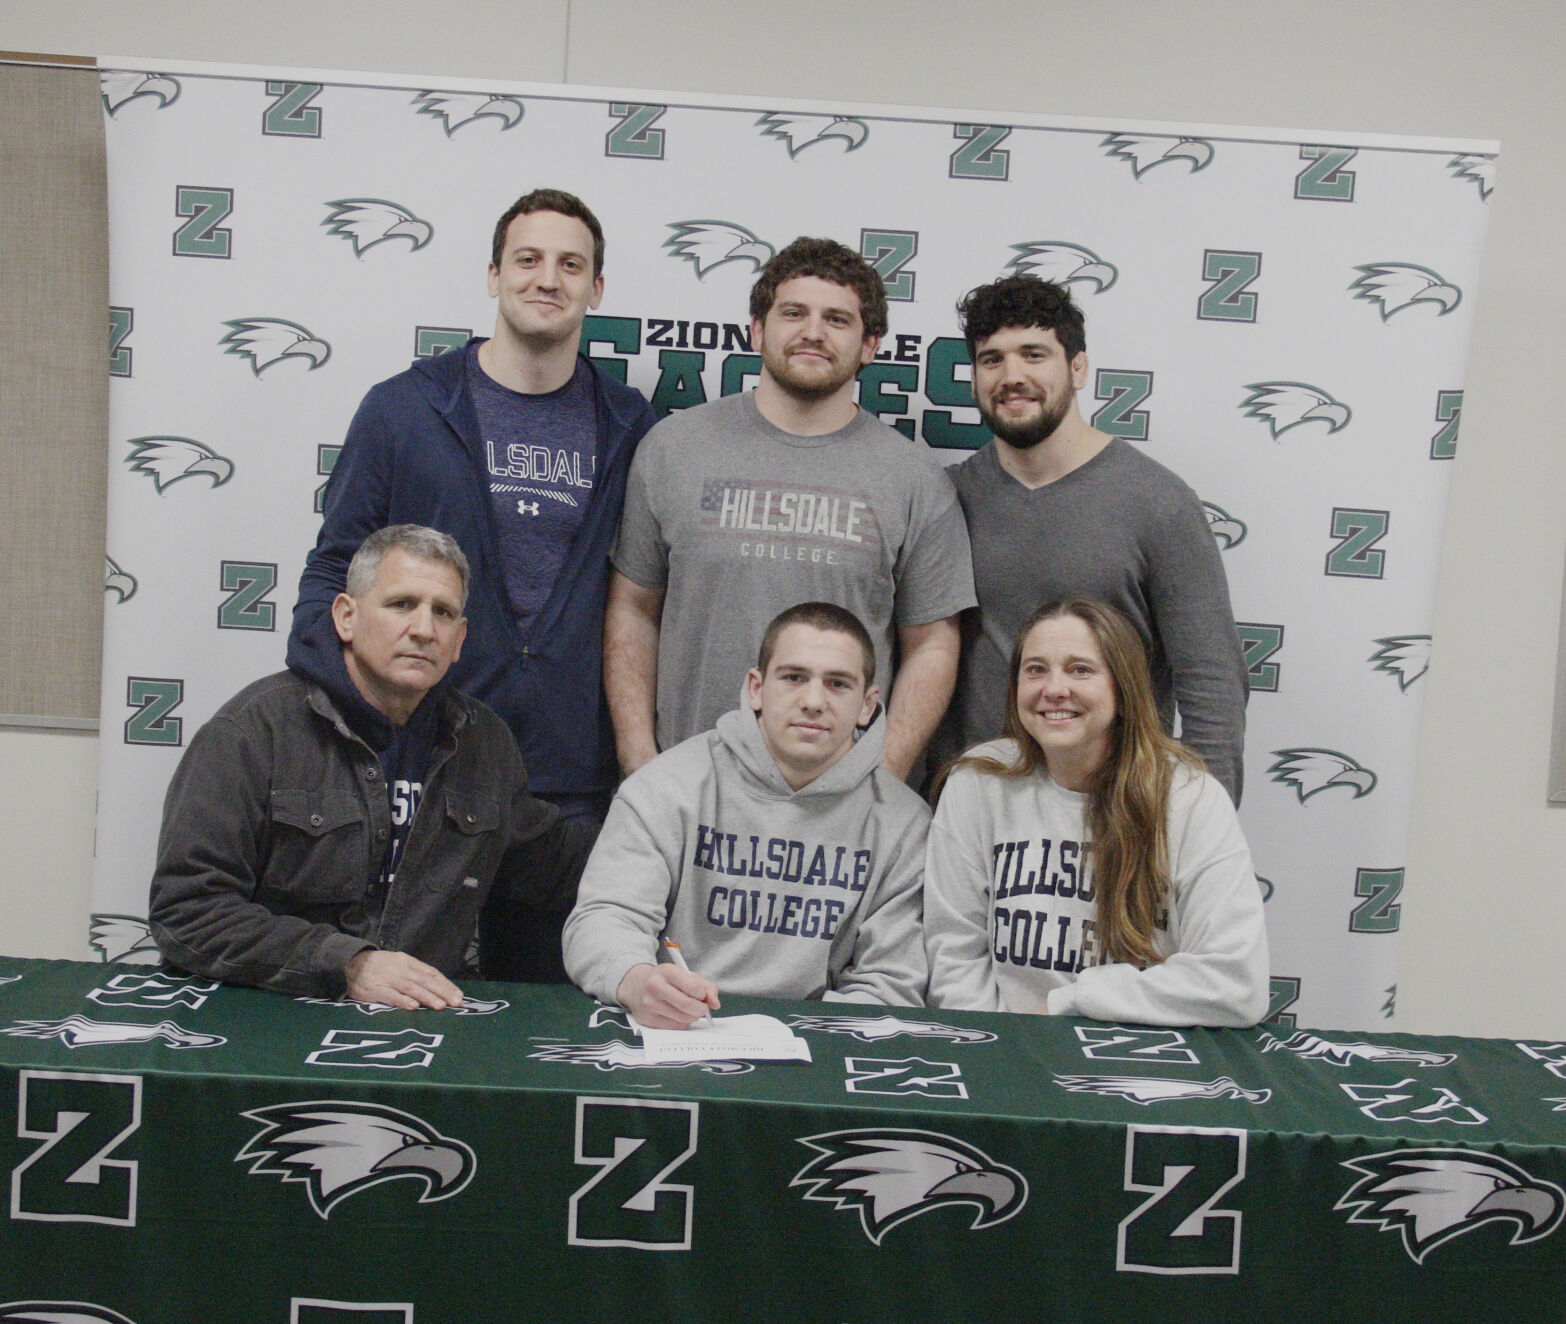 Luke Penola commits to NCAA Division II program at Hillsdale College for academics and football